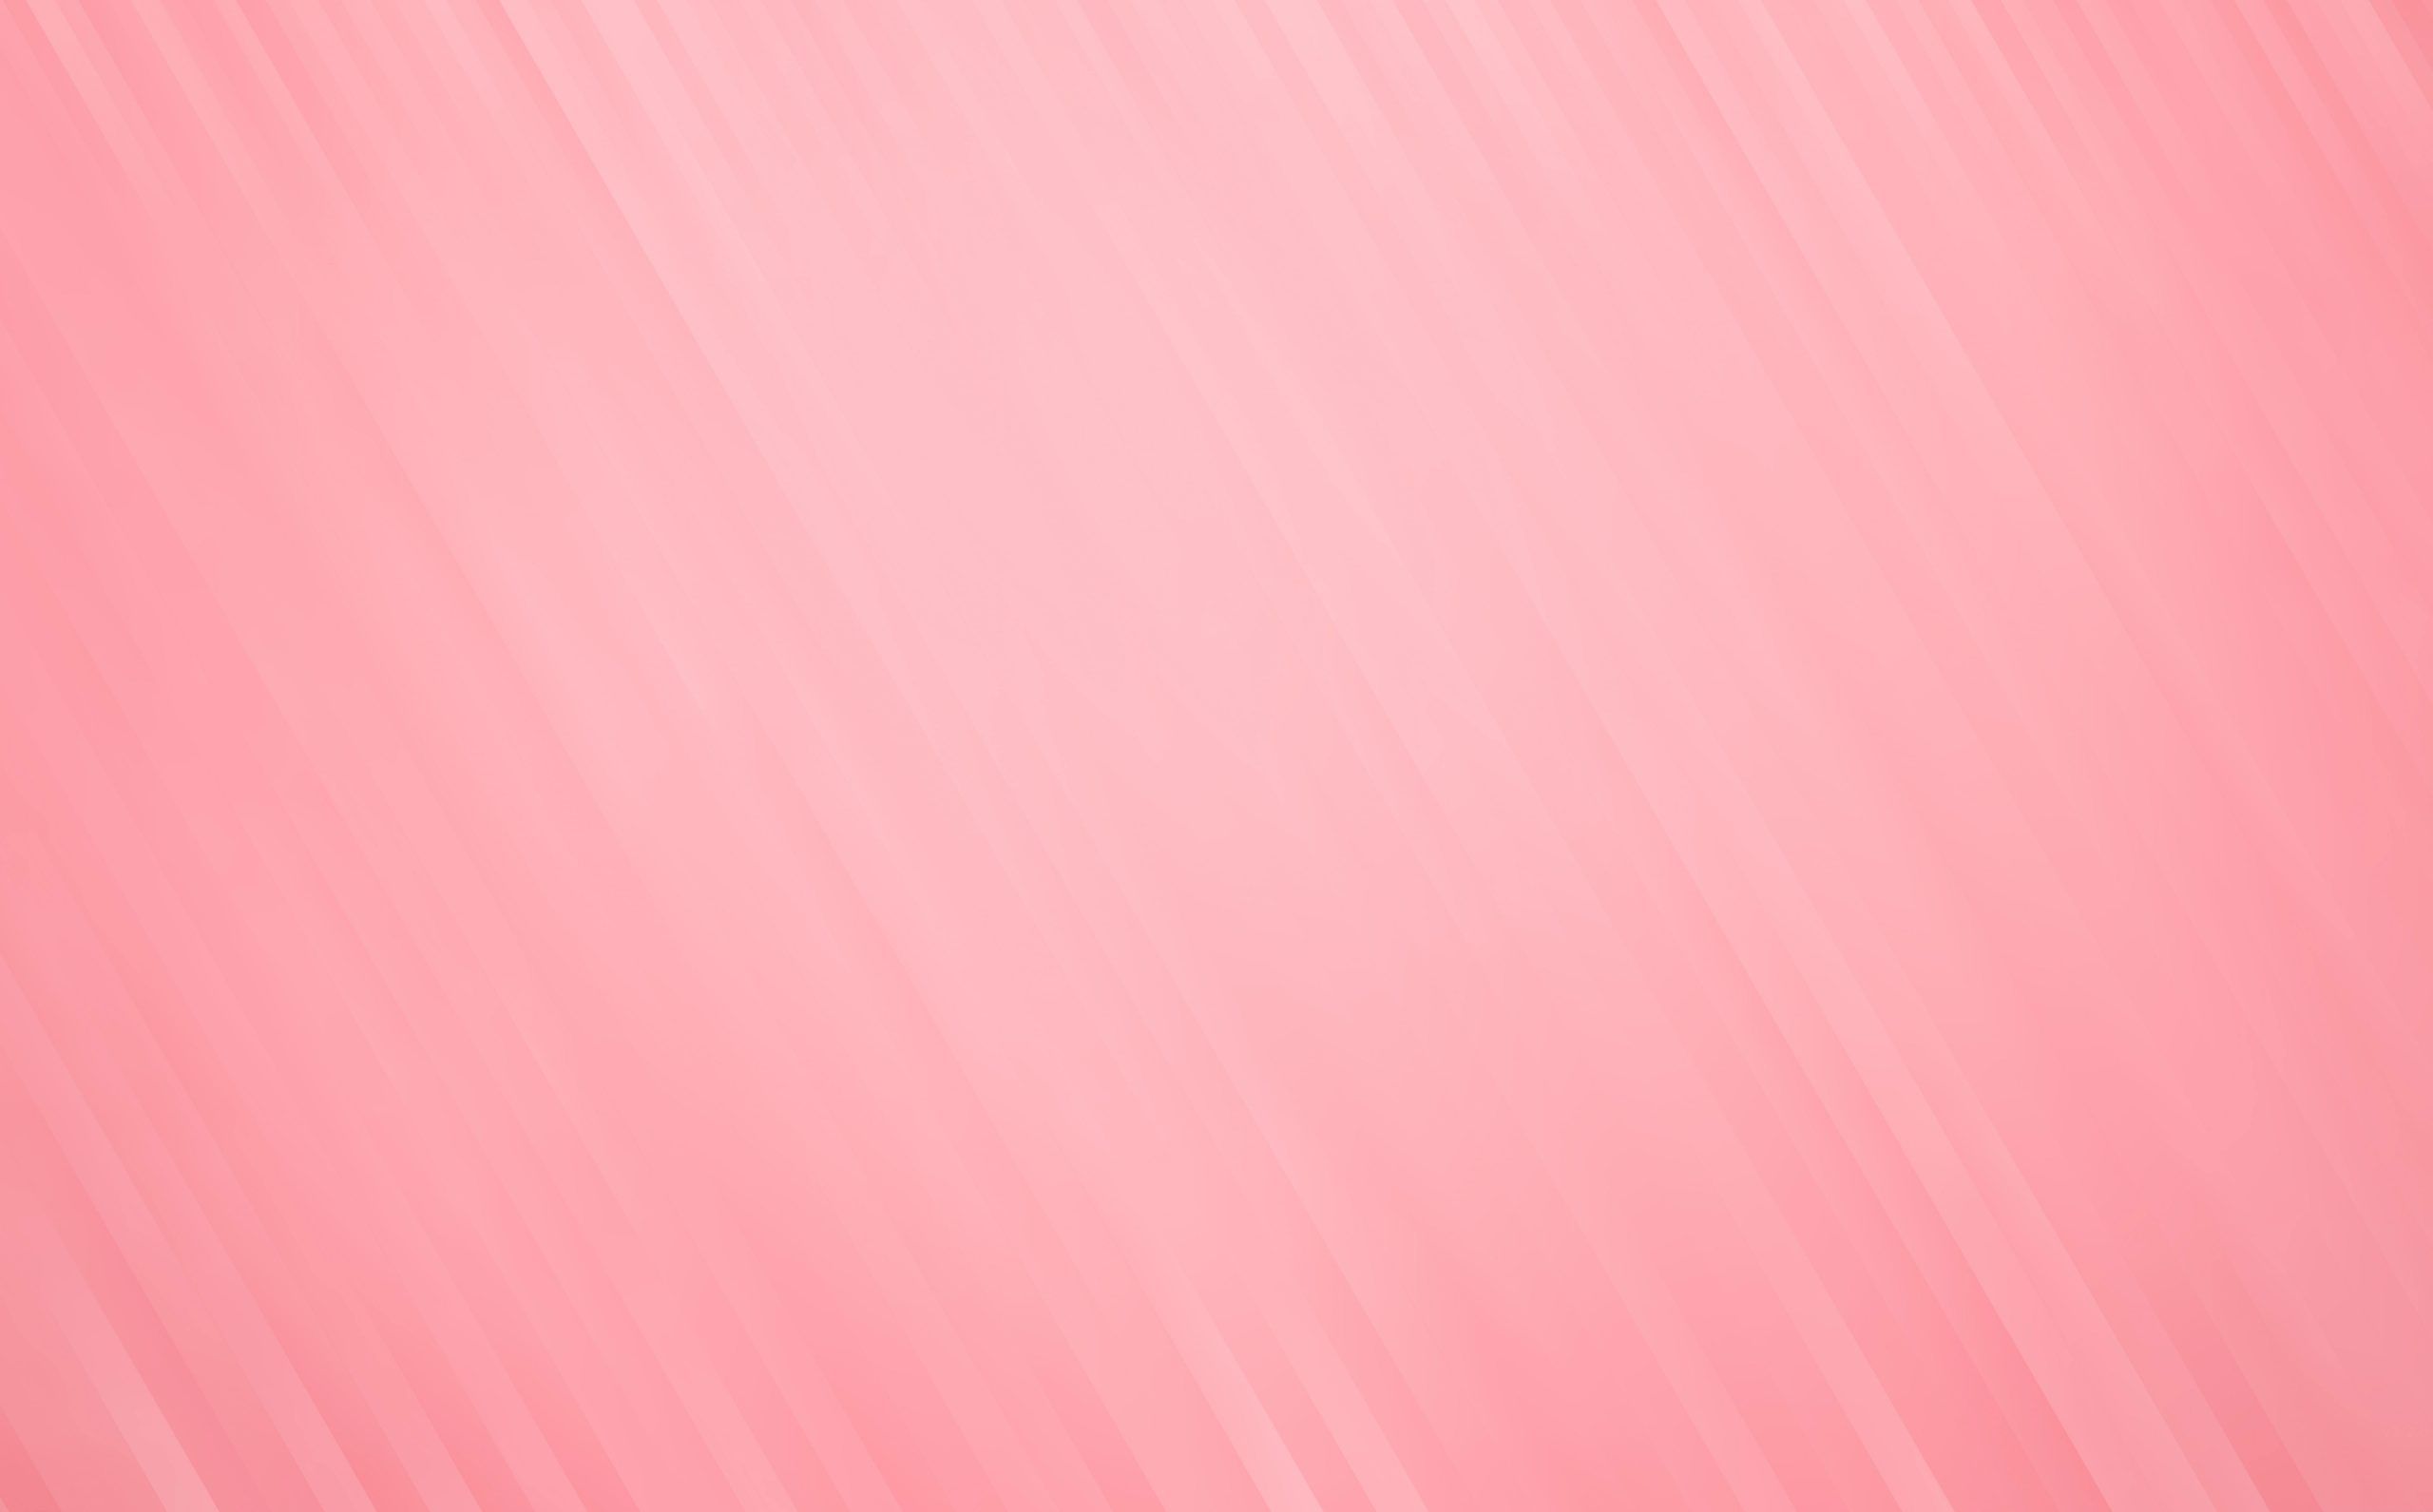 Baby Pink wallpaper, Cute, Lines, Abstract, Design, Minimalist • Wallpaper For You HD Wallpaper For Desktop & Mobile